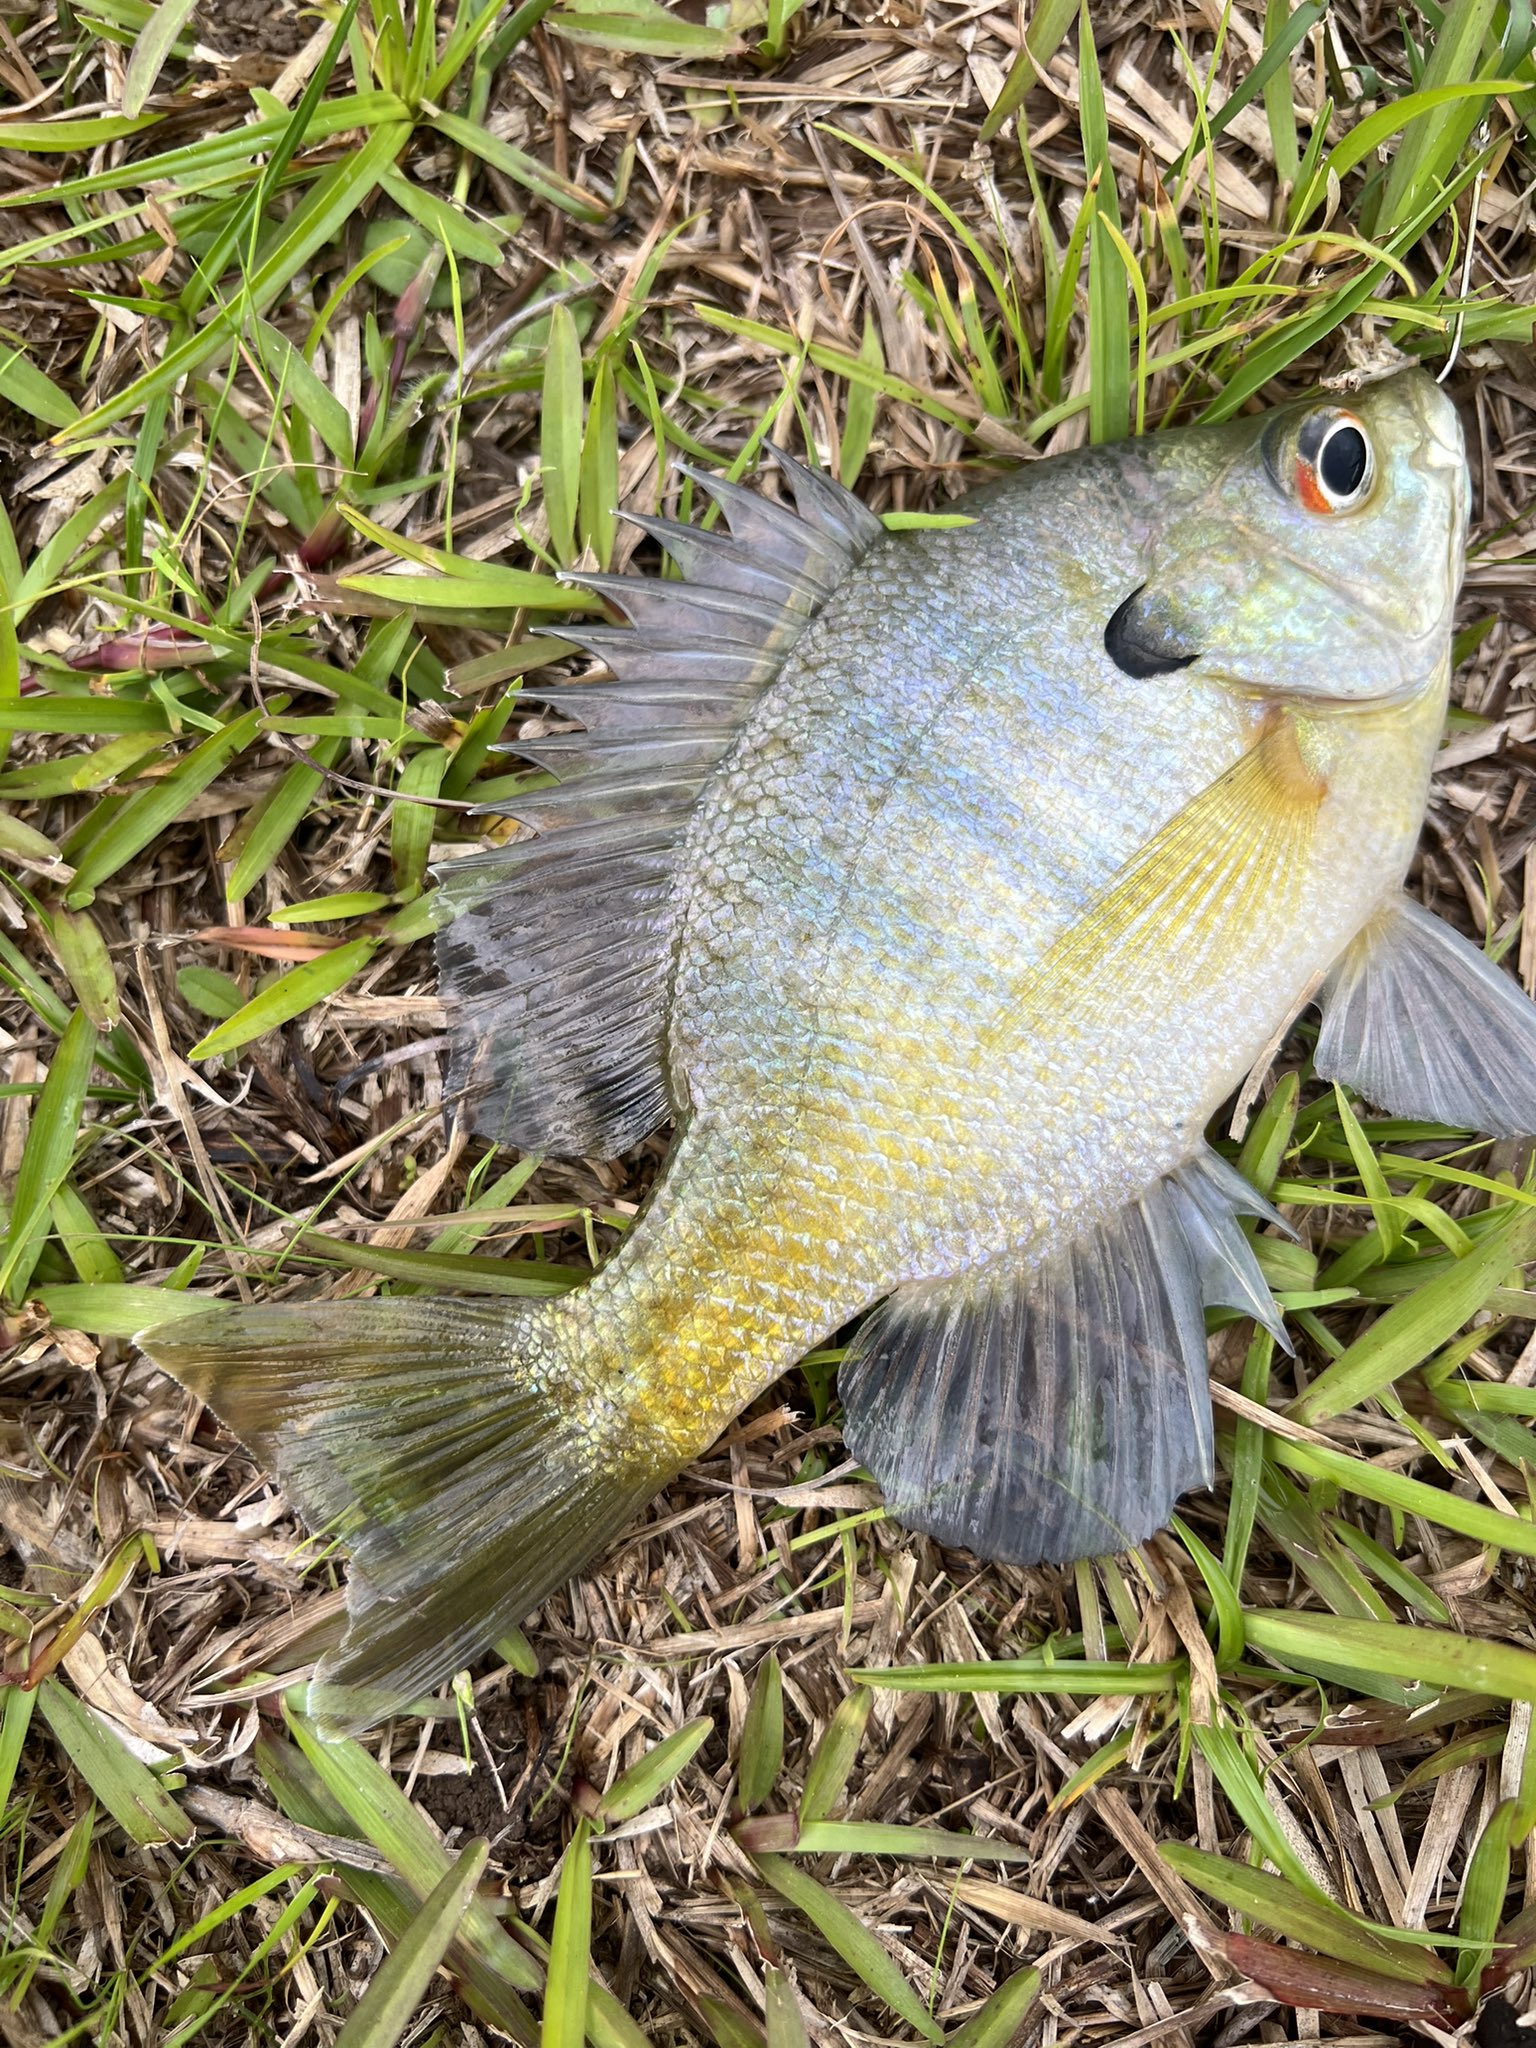 CajunAsian on X: We caught a variety of fish in the pond… Bass